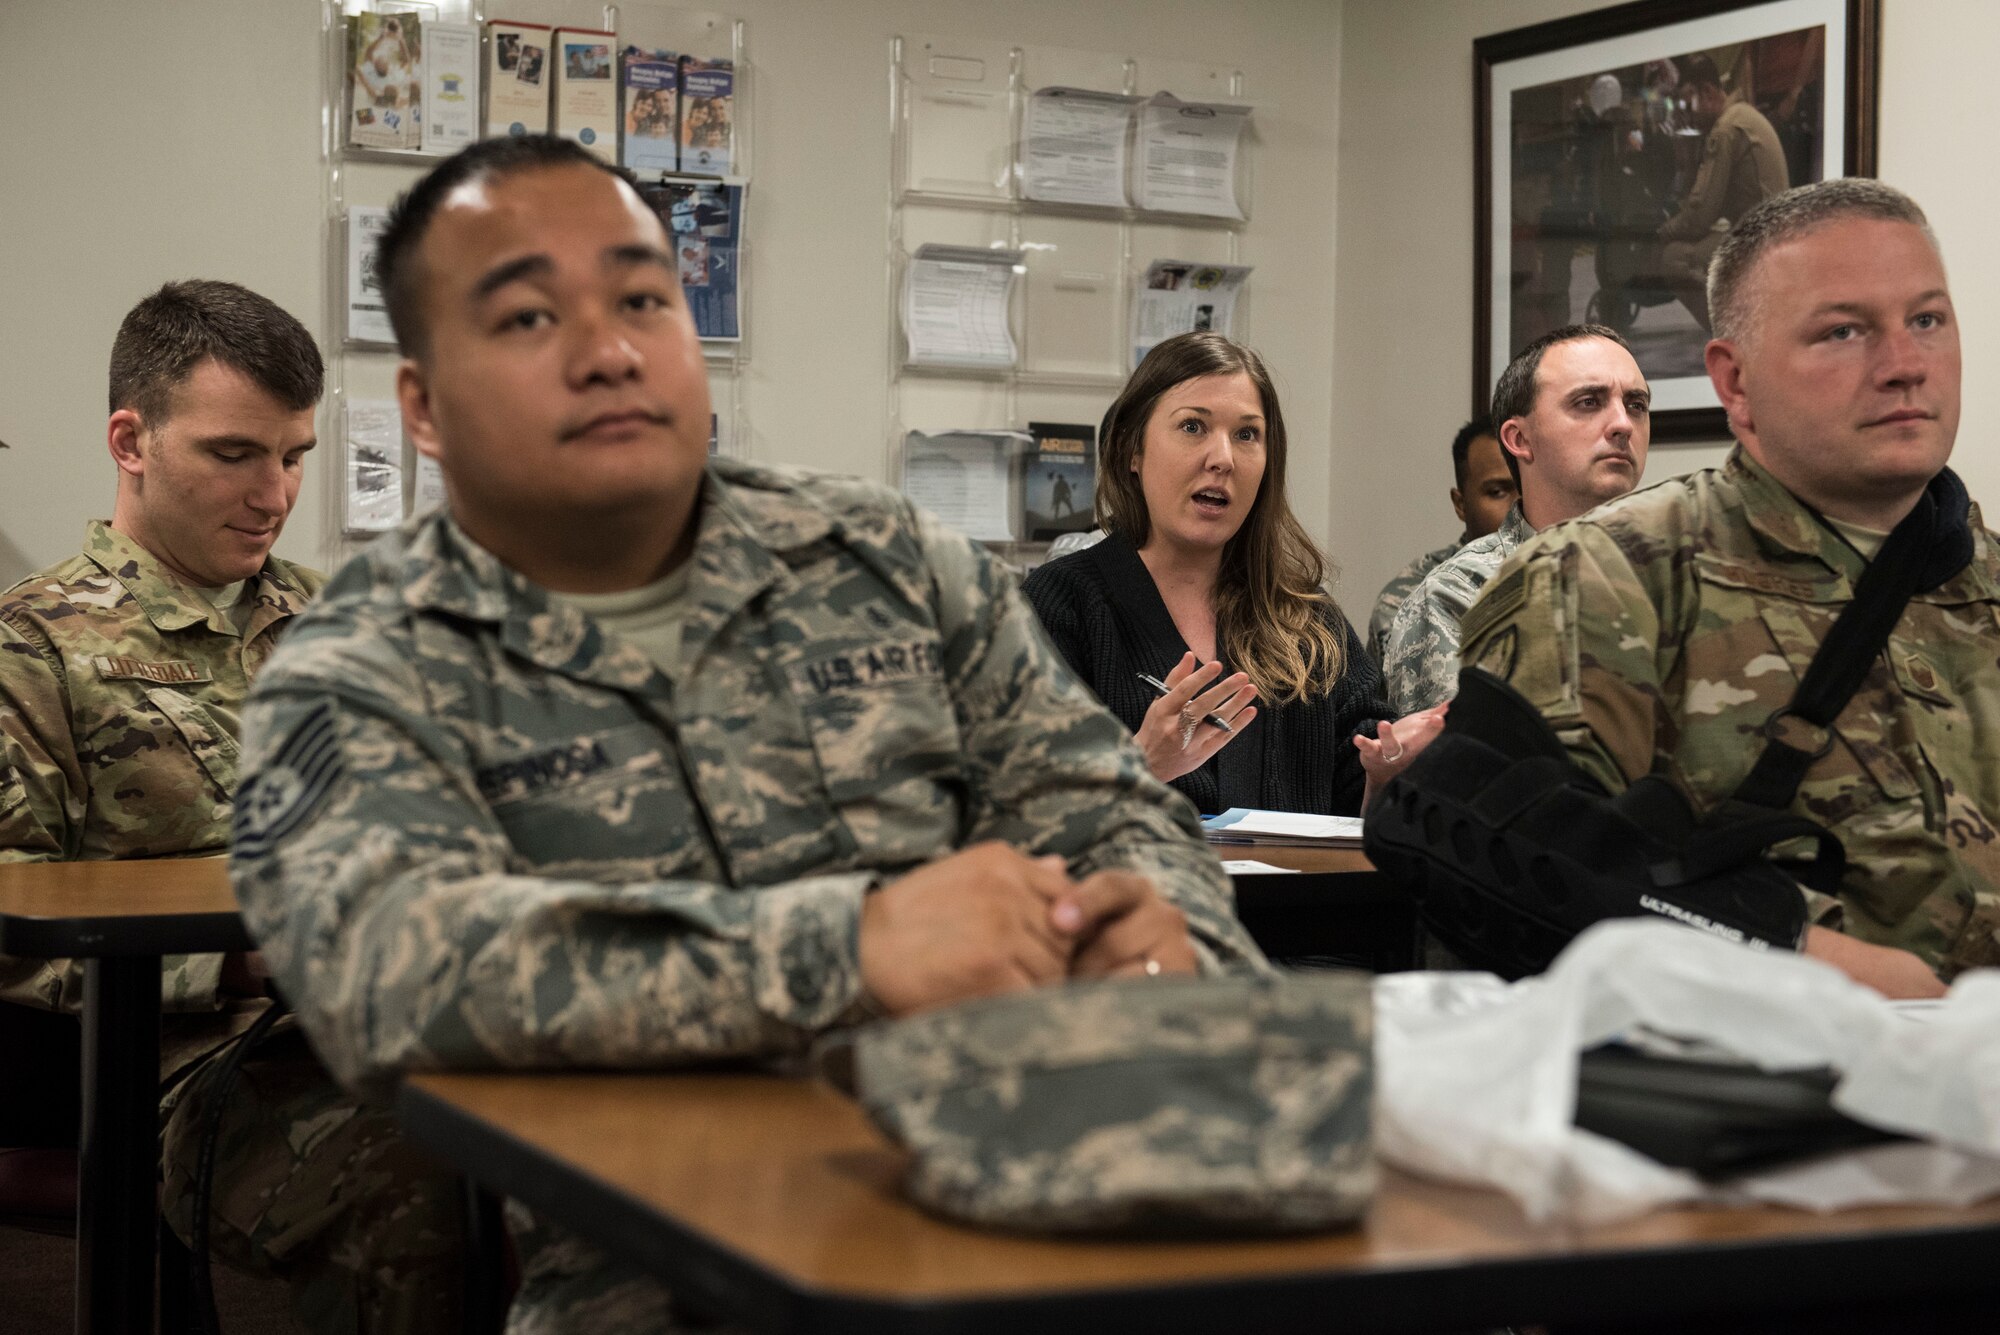 A Team Shaw member asks questions during a Smooth Move class at the 20th Force Support Squadron Airman and Family Readiness Center at Shaw Air Force Base, S.C., March 21, 2018.